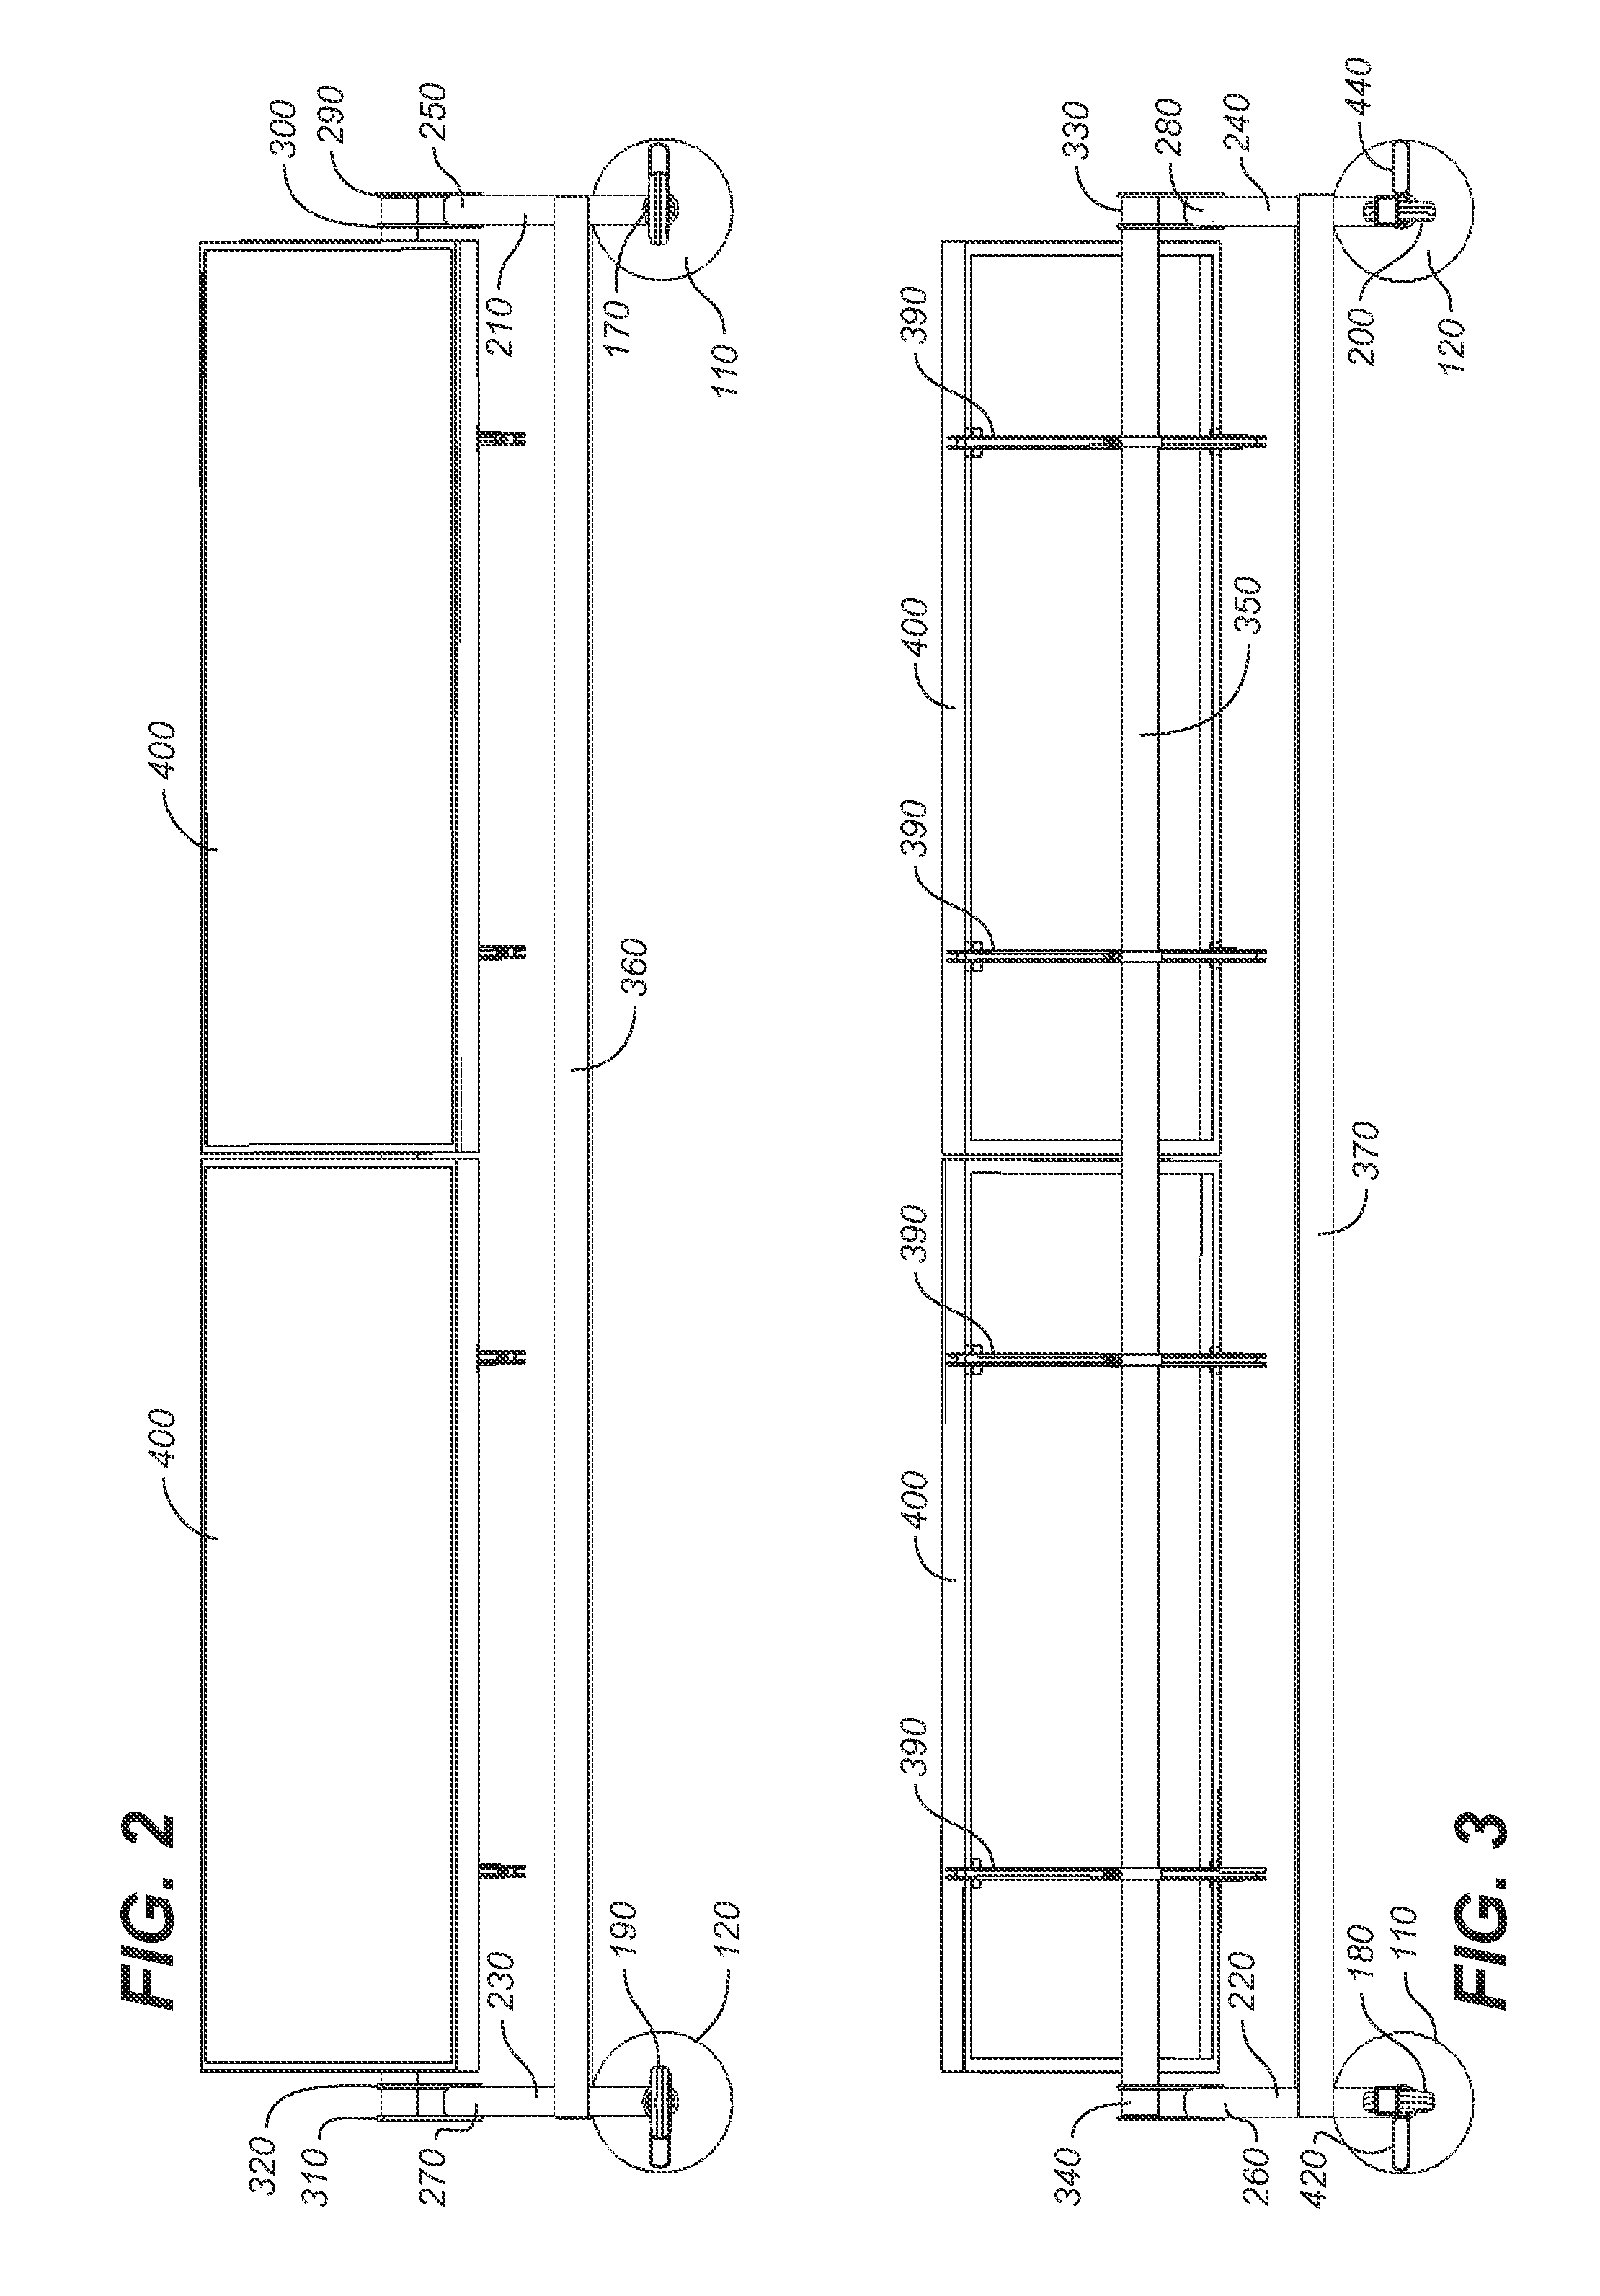 Floating support structure for a solar panel array